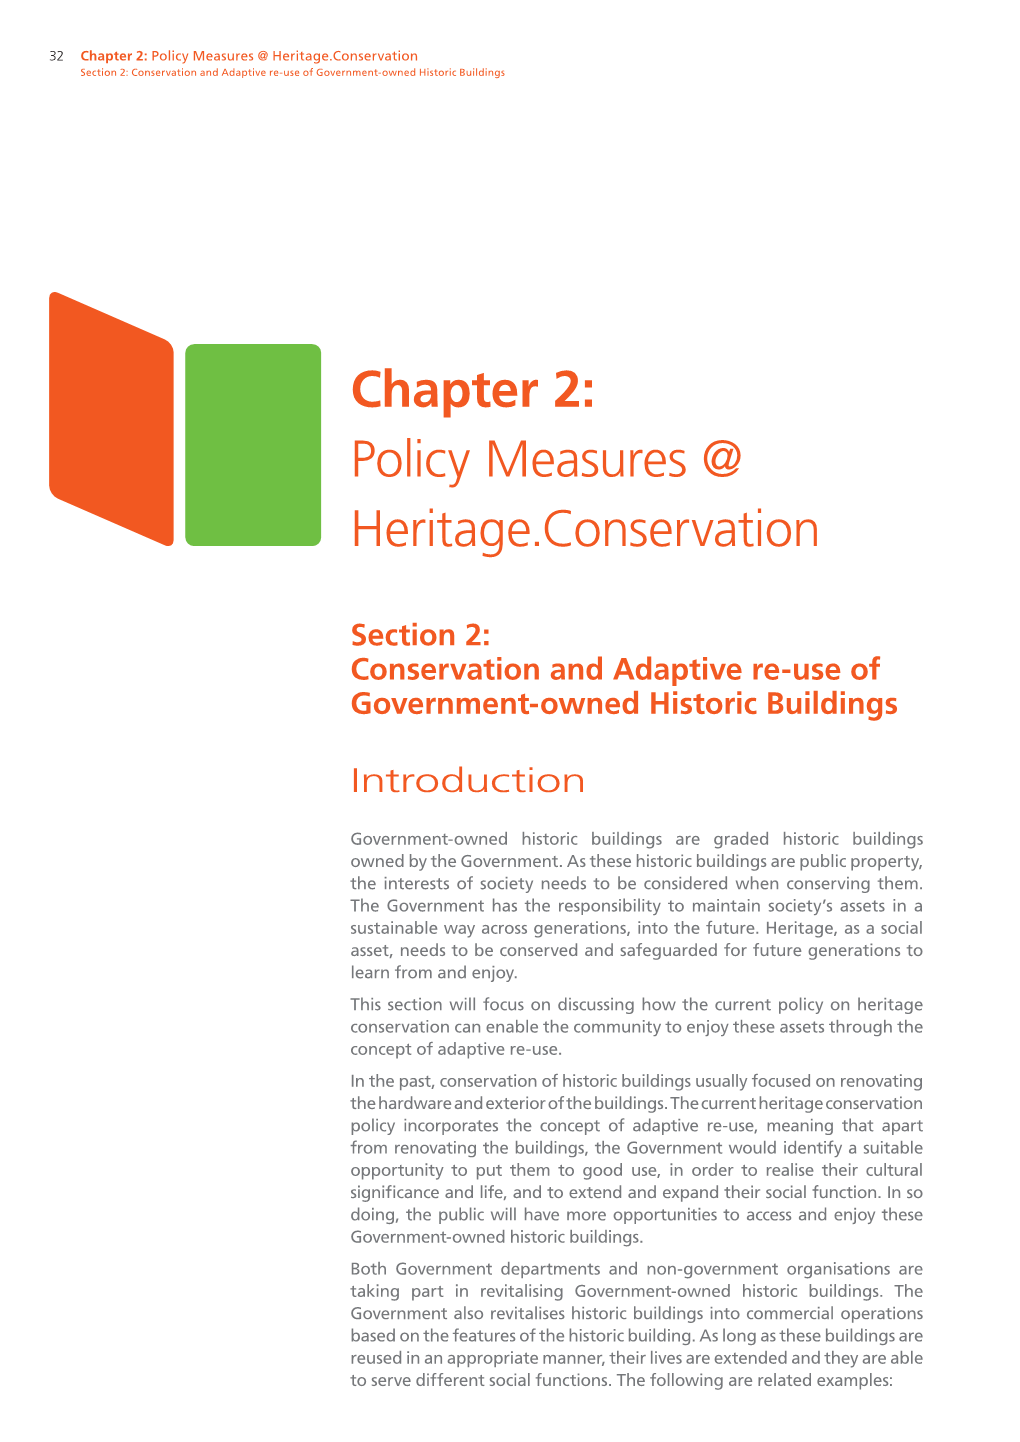 Chapter 2: Policy Measures @ Heritage.Conservation Section 2: Conservation and Adaptive Re-Use of Government-Owned Historic Buildings